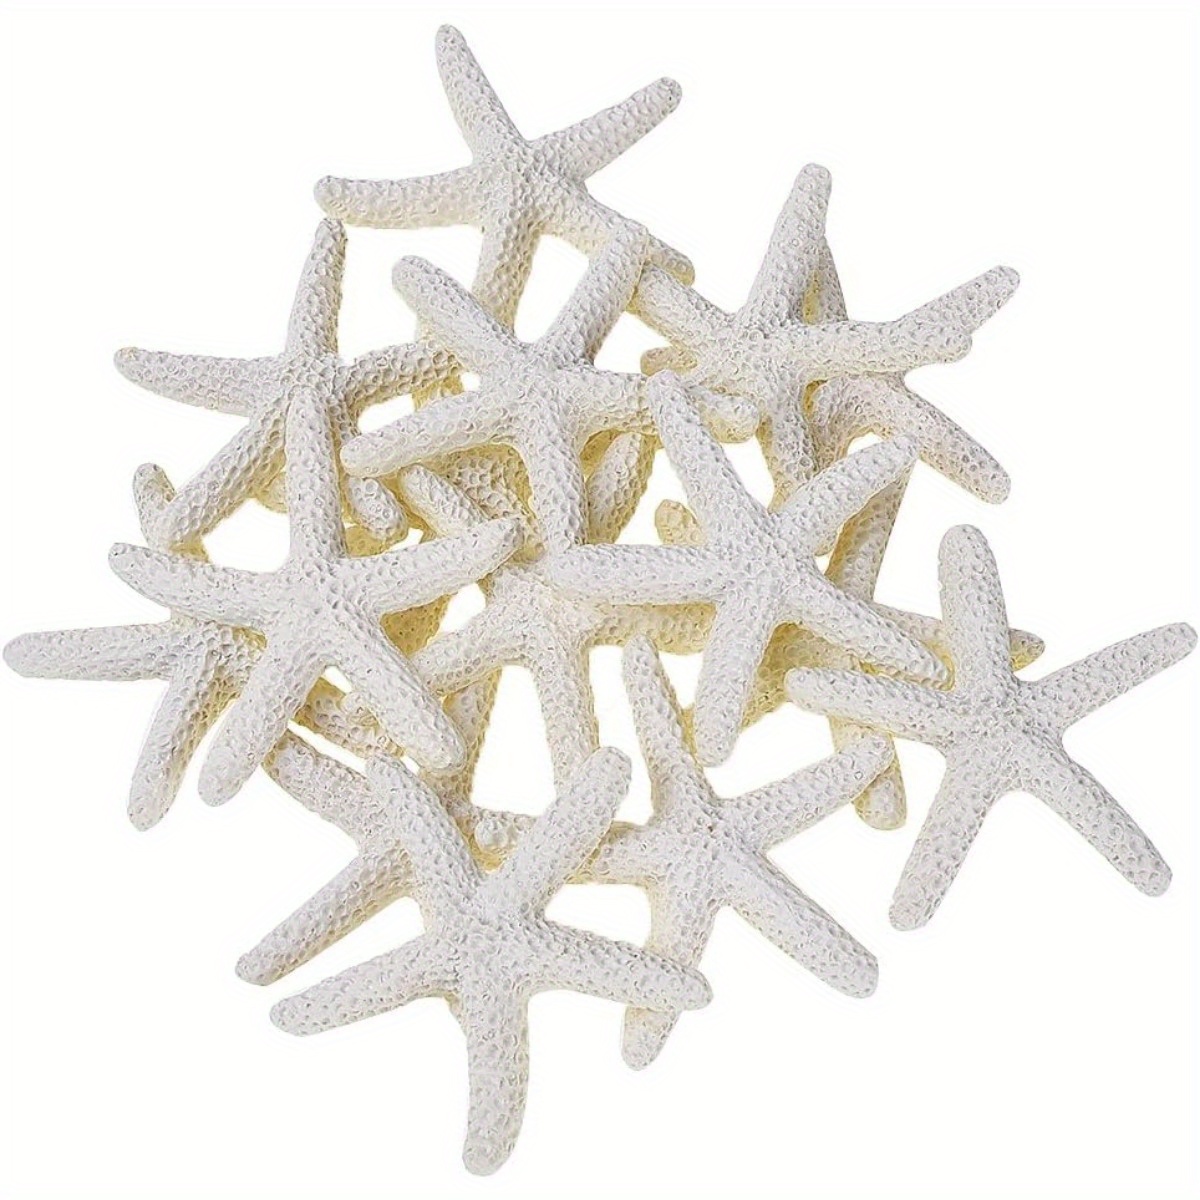 

20pcs Resin Starfish Ornaments, 3cm Pencil Finger Starfish, No Feathers, Electricity-free For Wedding, Home Decor, And Craft Projects - Universal Holidays Decor (white)